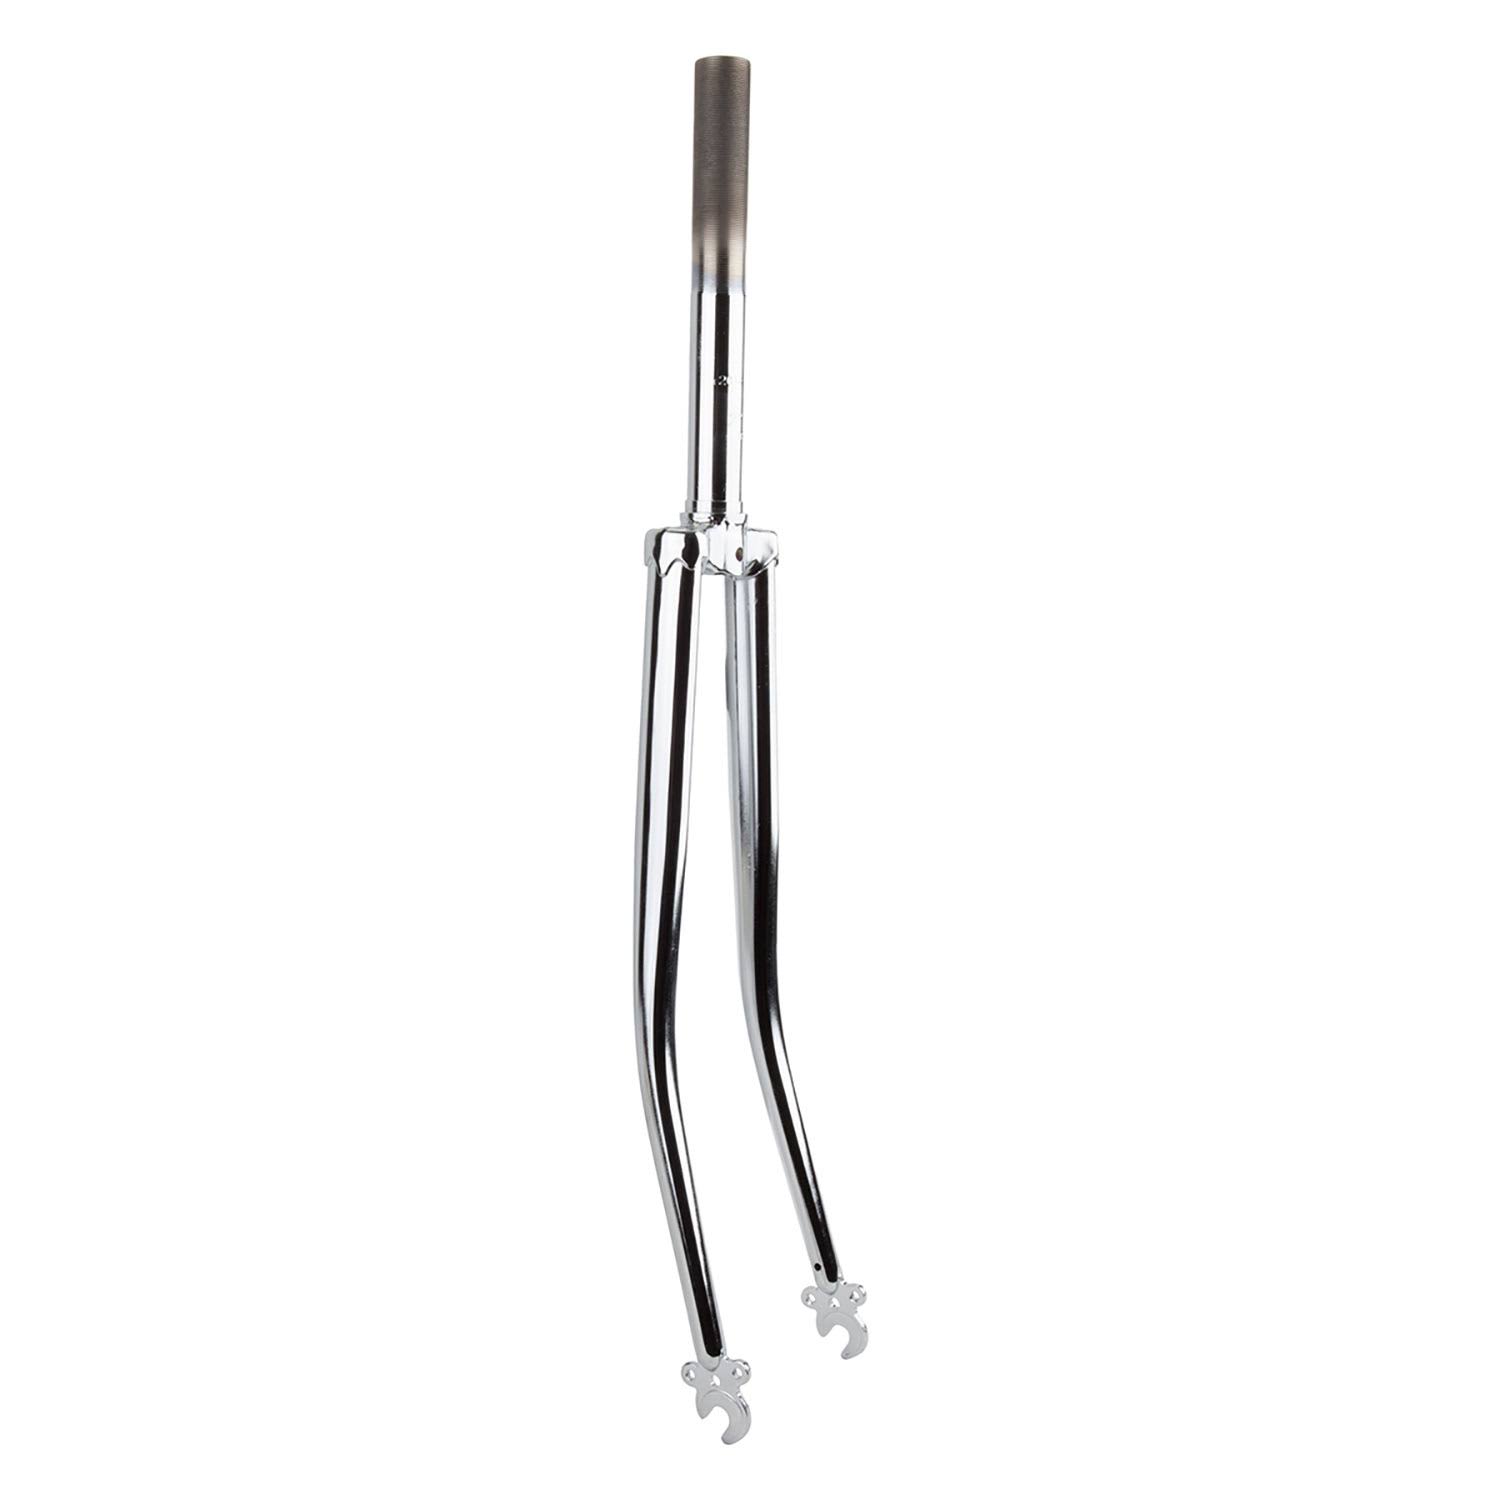 Sunlite Cycling LW Fork - 27" x 1 1/4", 22.2mm x 200mm x 100mm CP for Bicycling